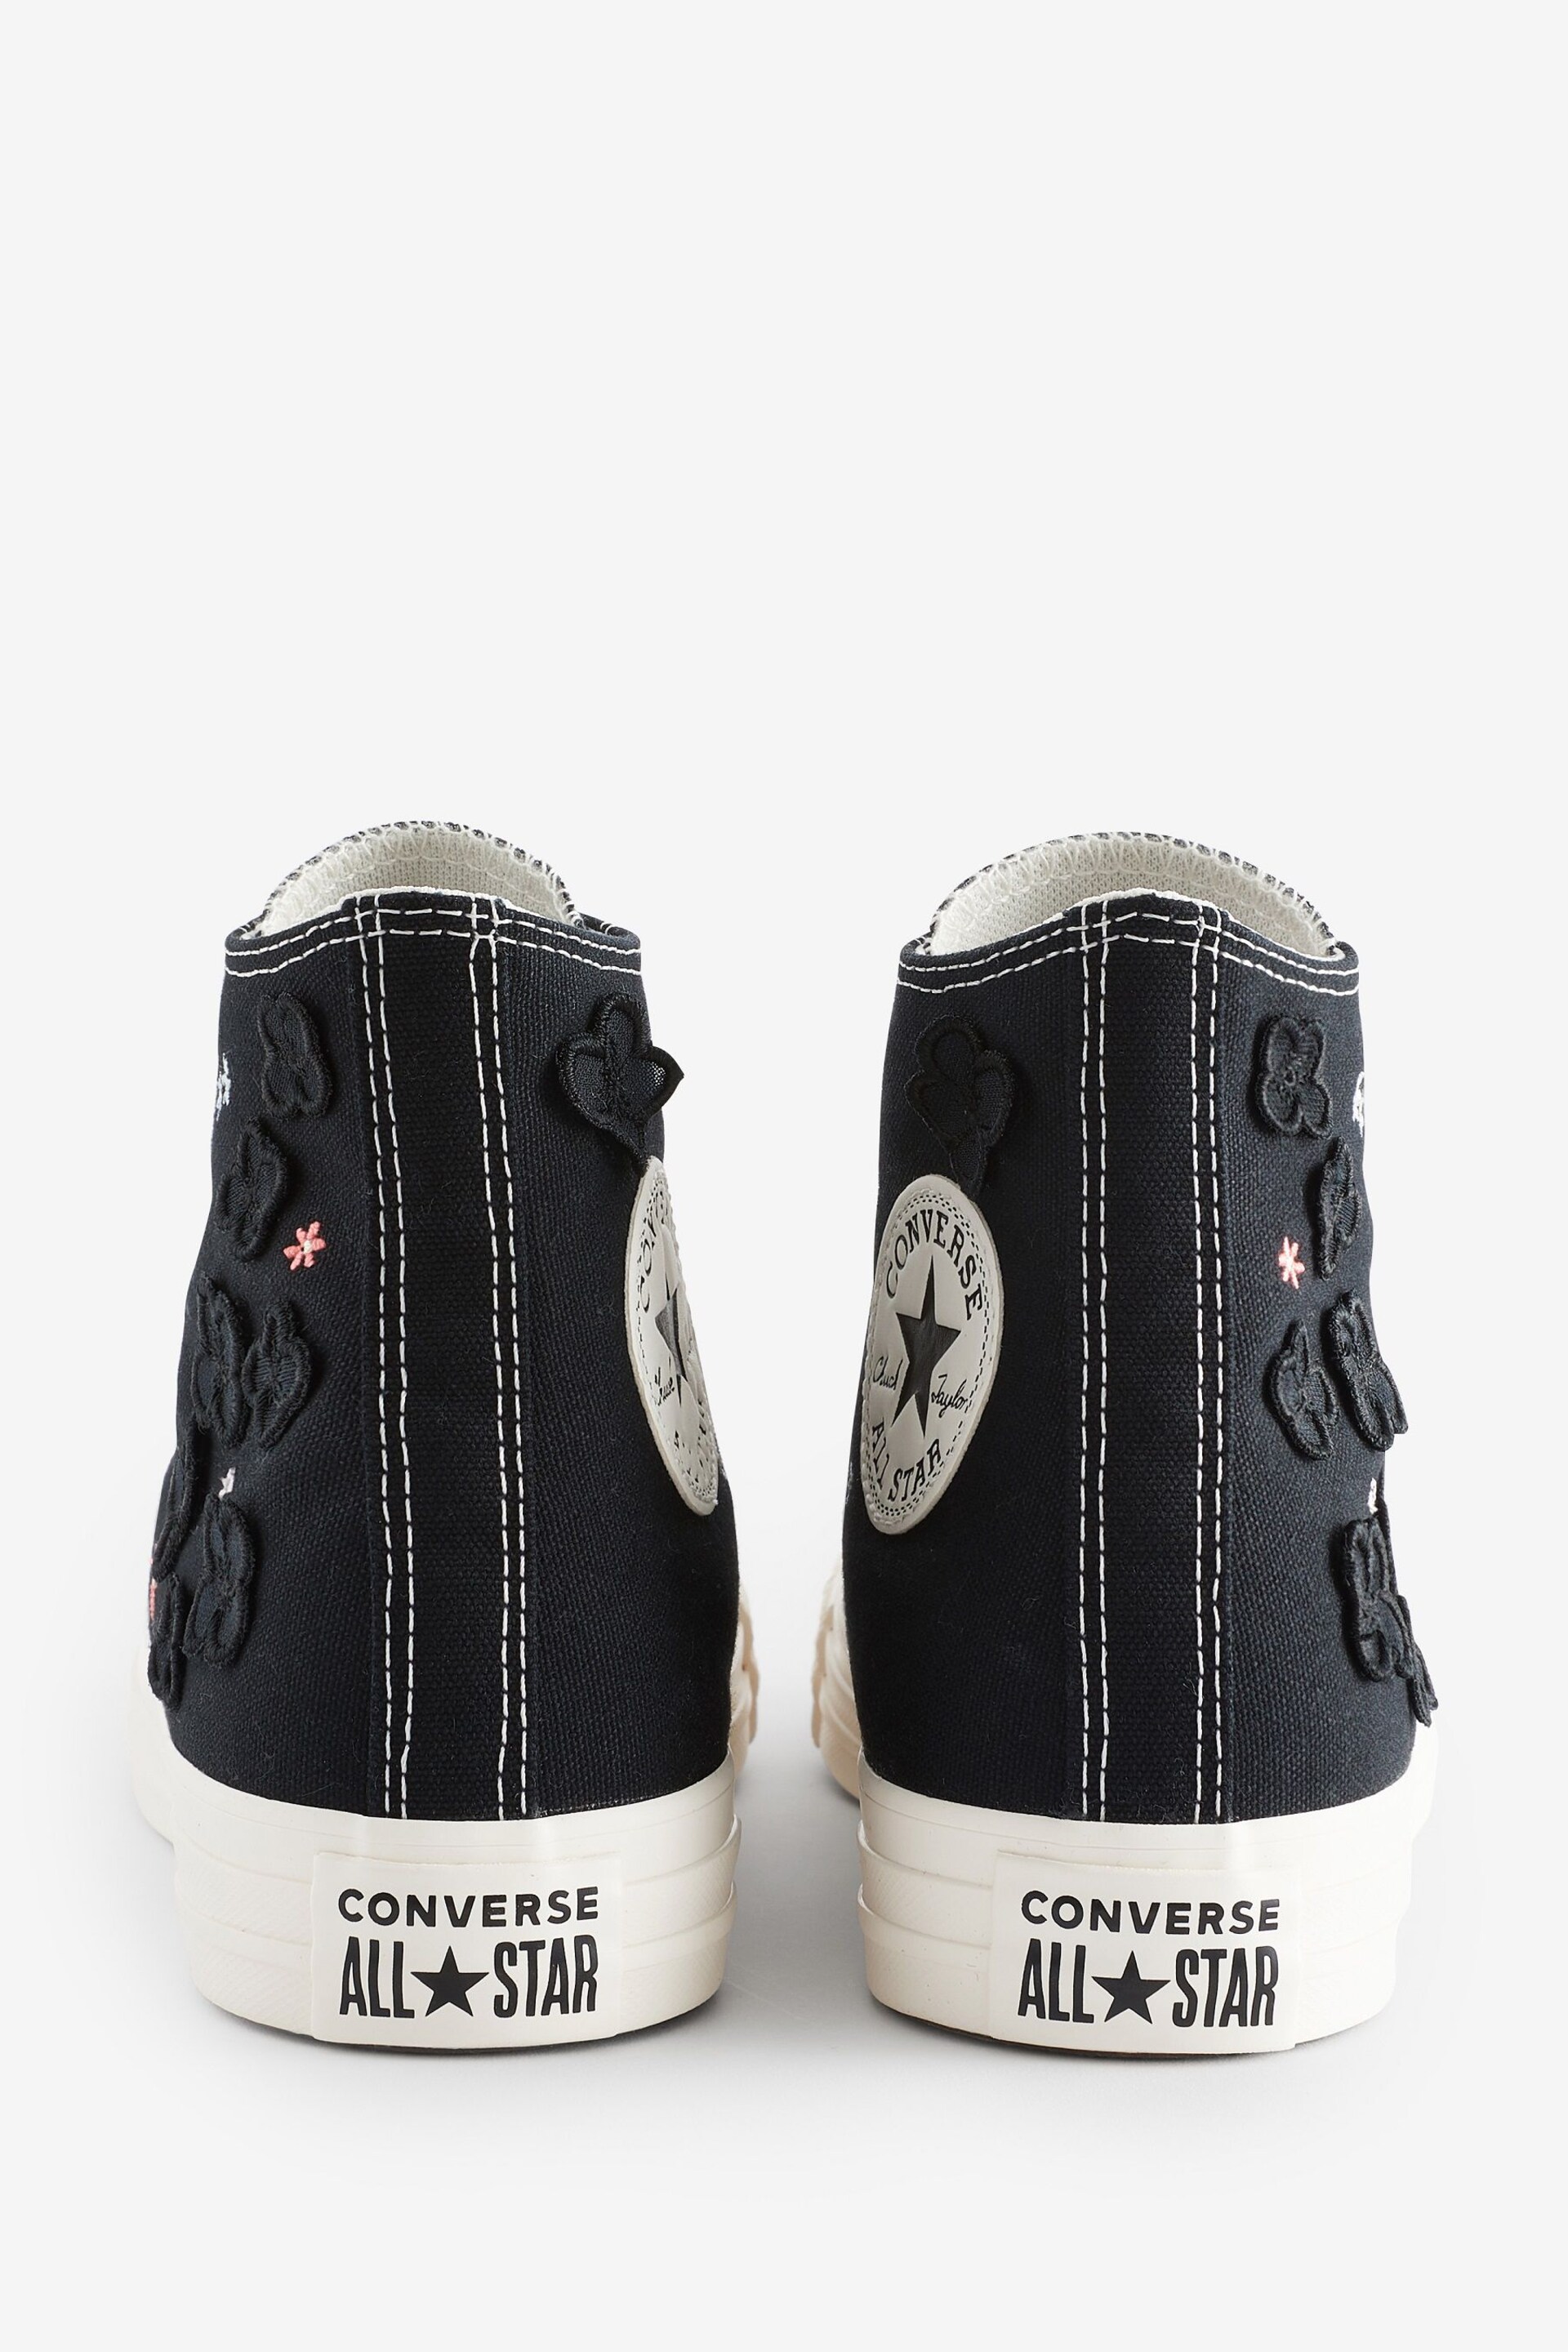 Converse Black Floral Embroidered High Top Trainers - Image 11 of 13